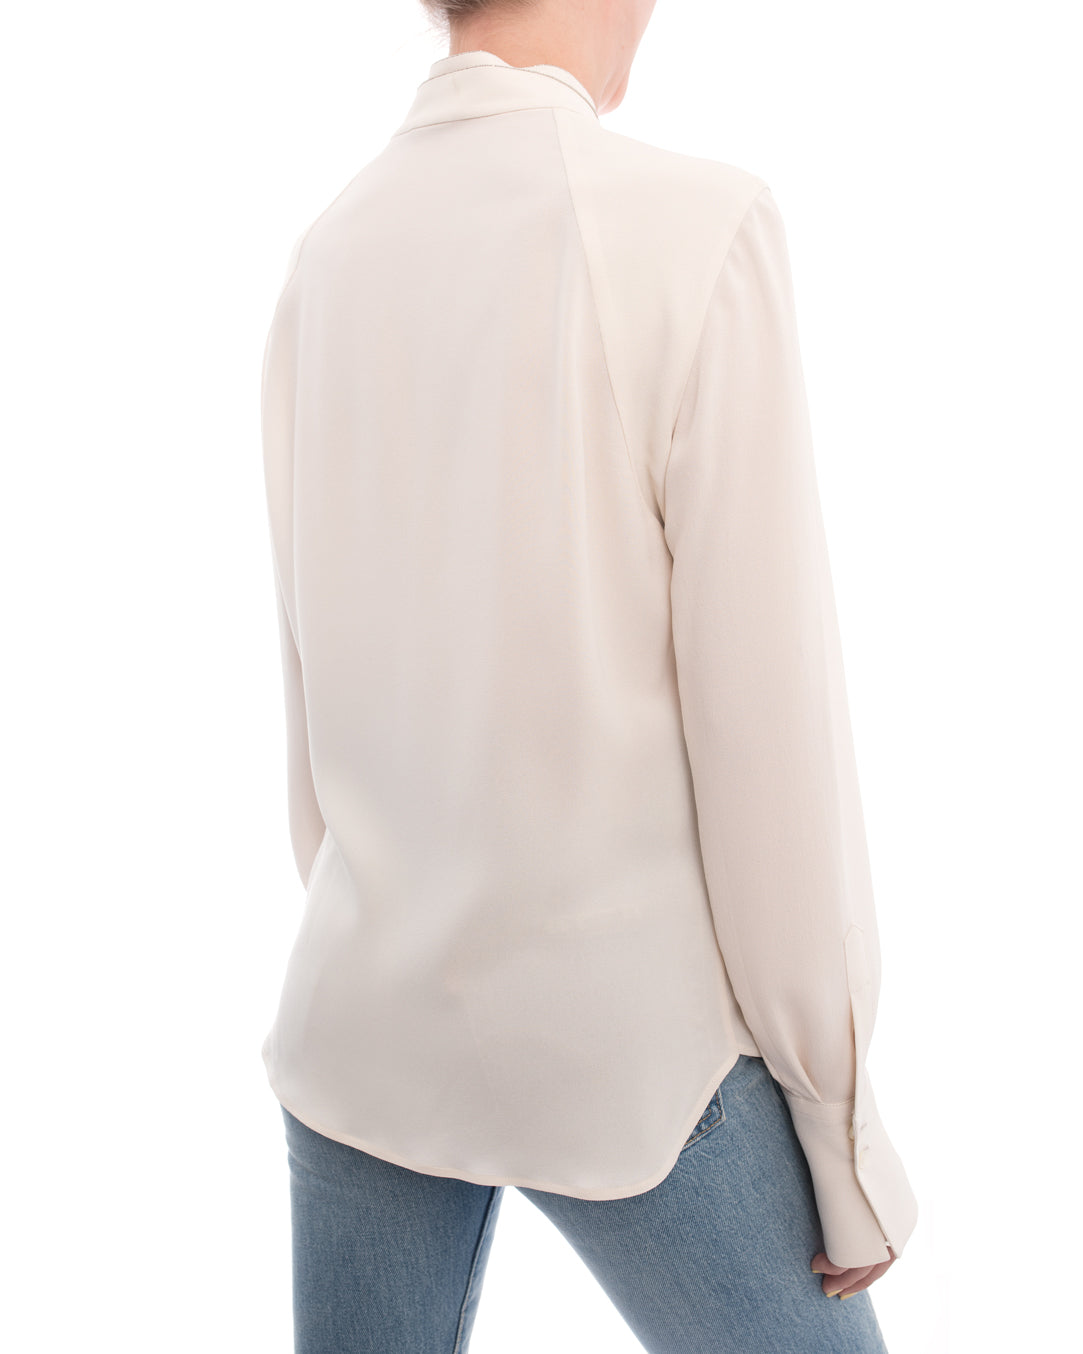 Brunello Cucinelli Ivory Silk blouse with Chain Trim - S – I MISS YOU ...